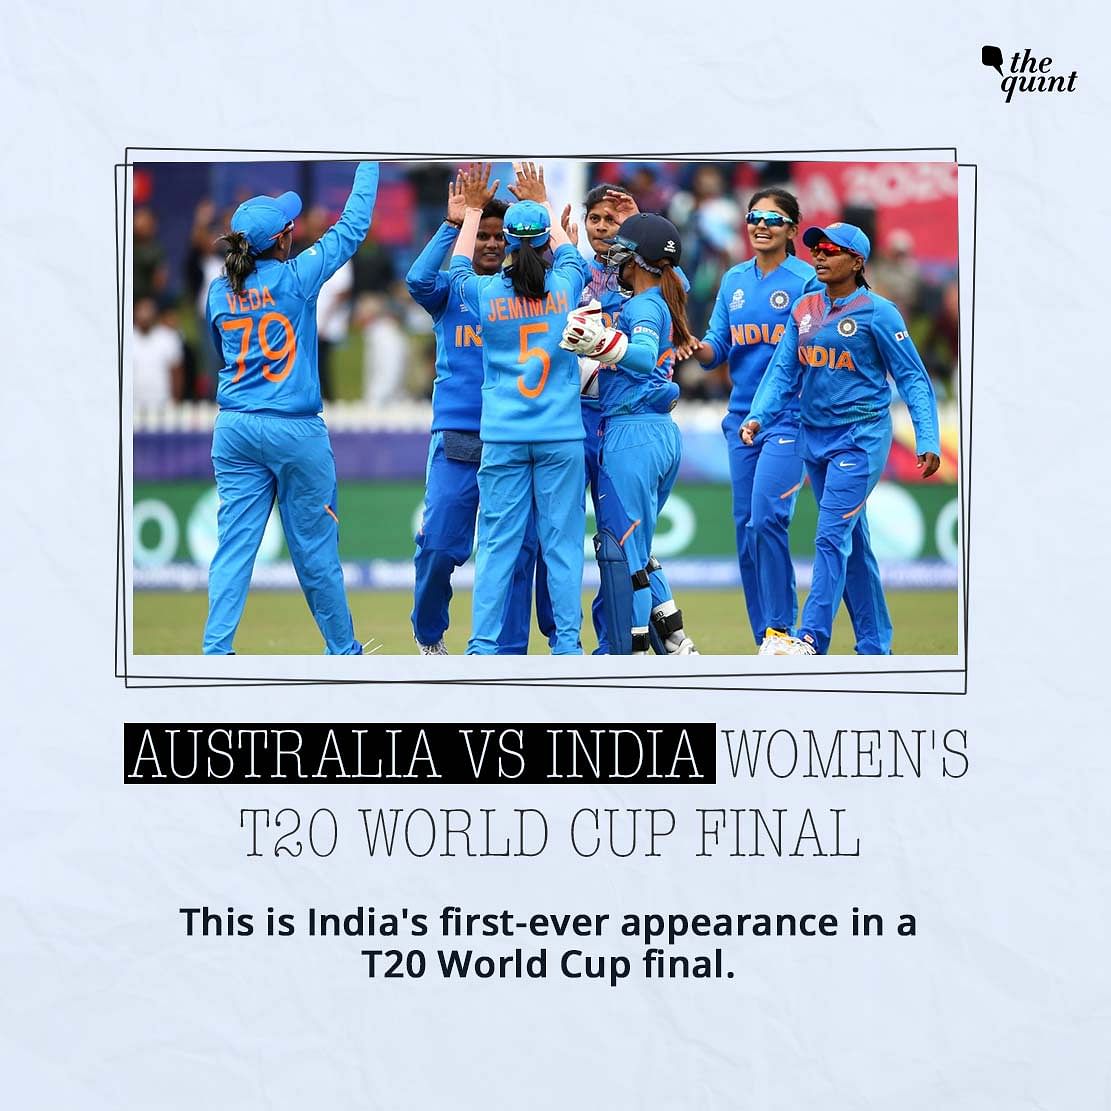 India and Australia are into the Women’s Twenty20 Cricket World Cup final. Big stats previewing the match.